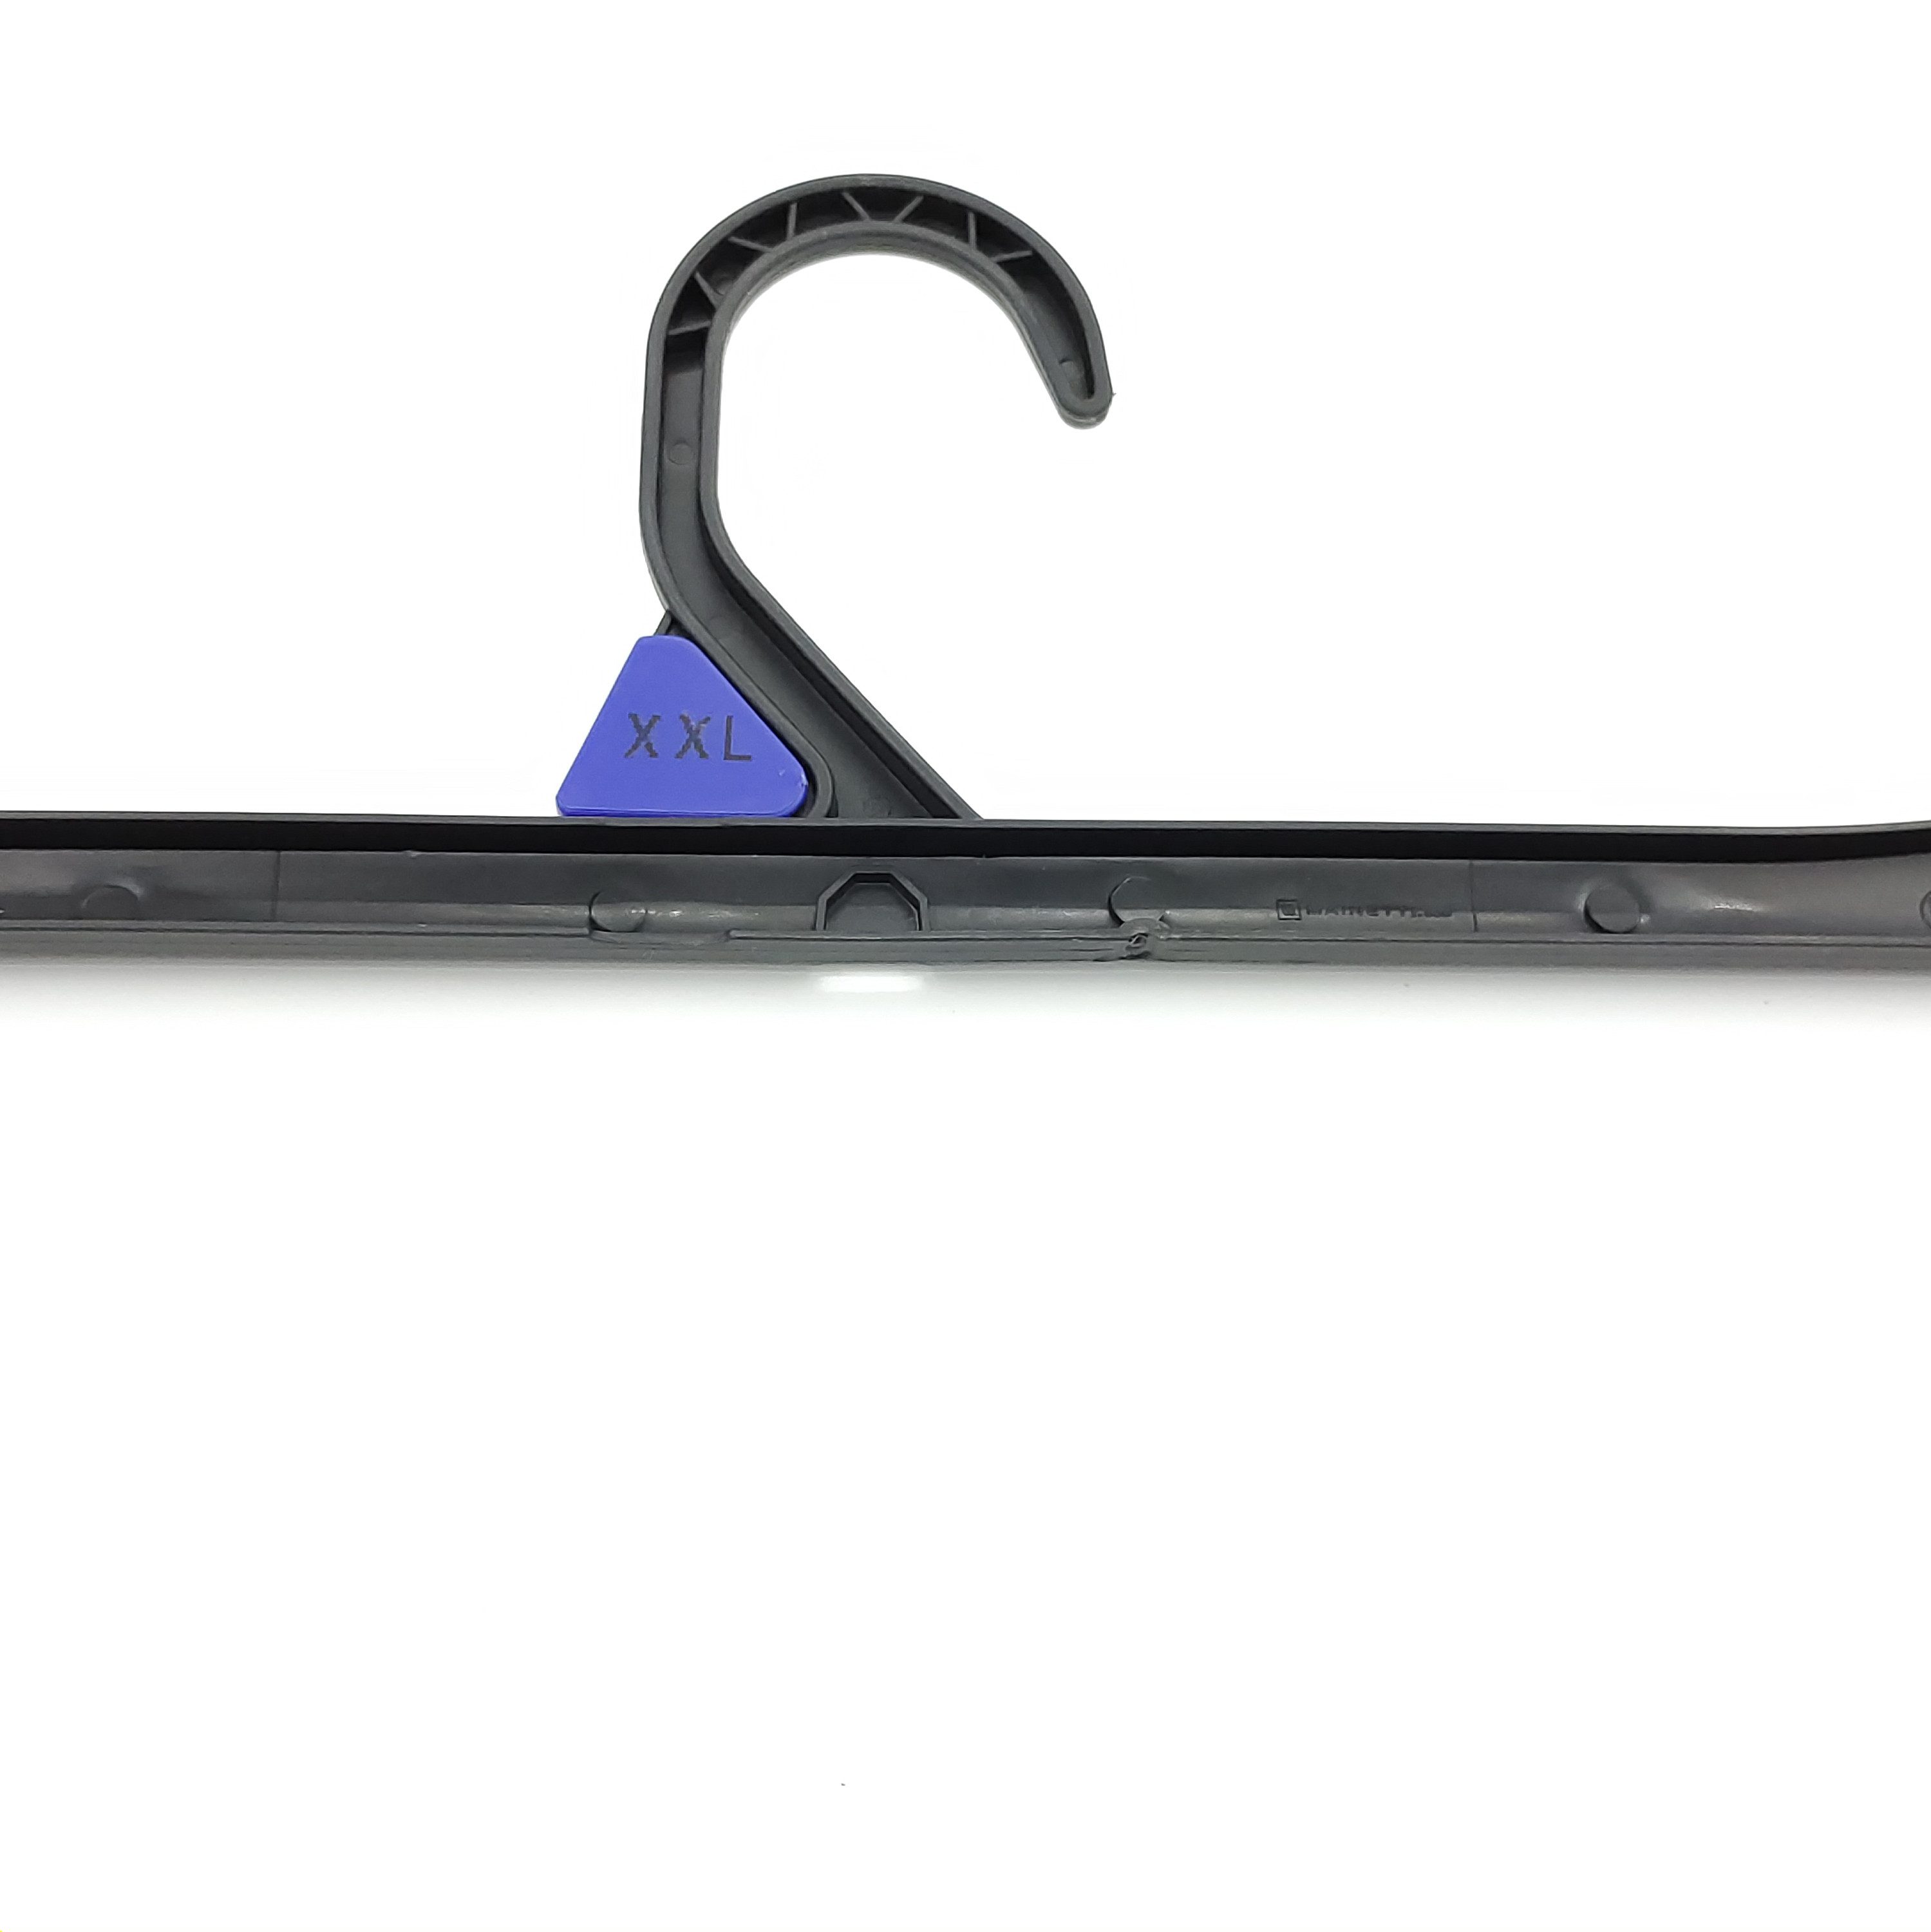 Re-used Black Plastic Bottom Hanger with Pinch Grips